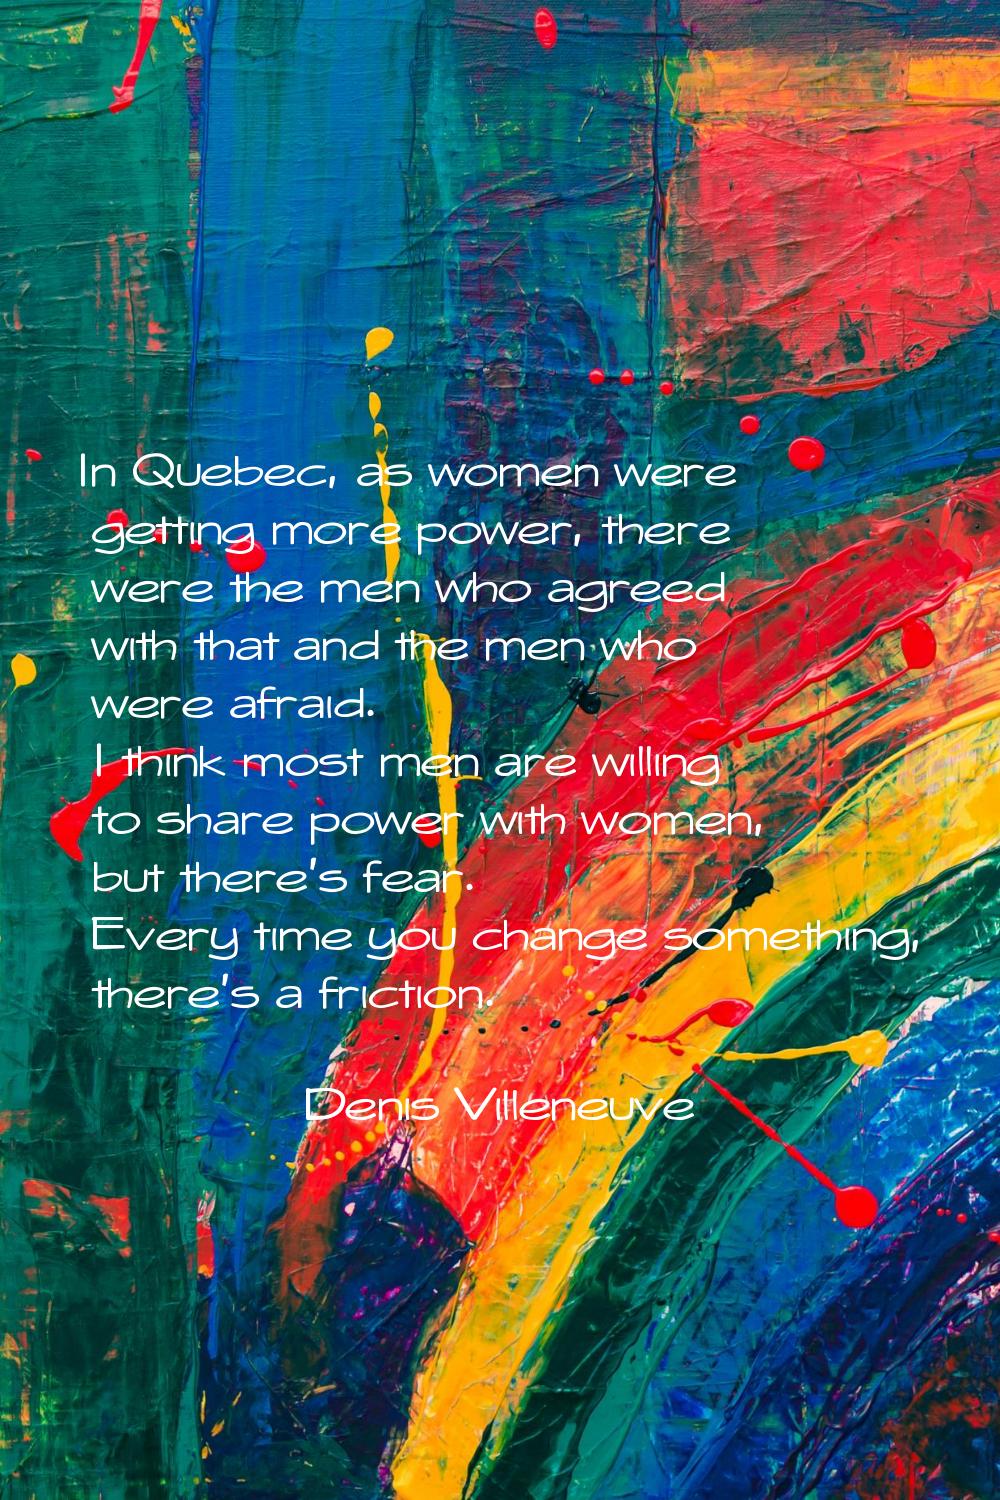 In Quebec, as women were getting more power, there were the men who agreed with that and the men wh